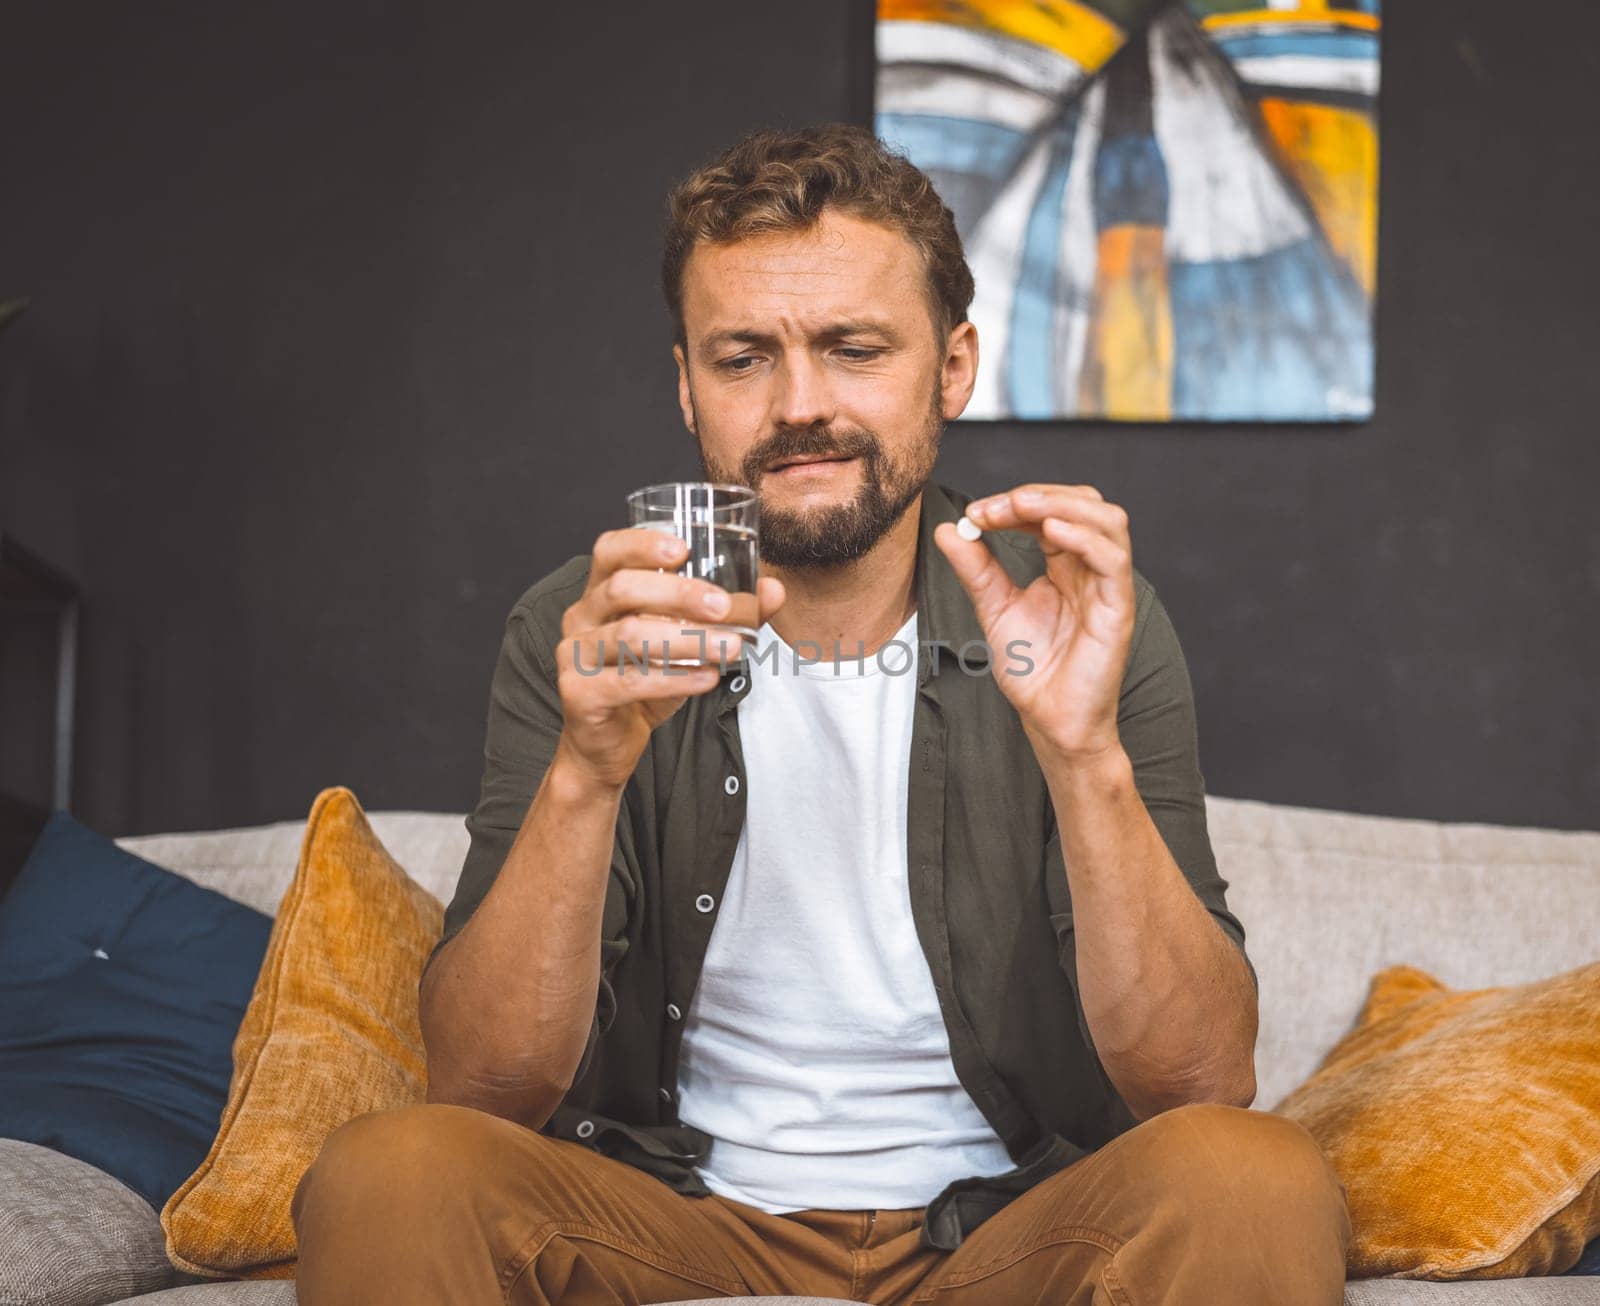 Caucasian man sit on sofa home, holding pill in one hand and glass of water in other. He focused on taking medicine, as he is dealing with illness or health condition that requires medication. High quality photo